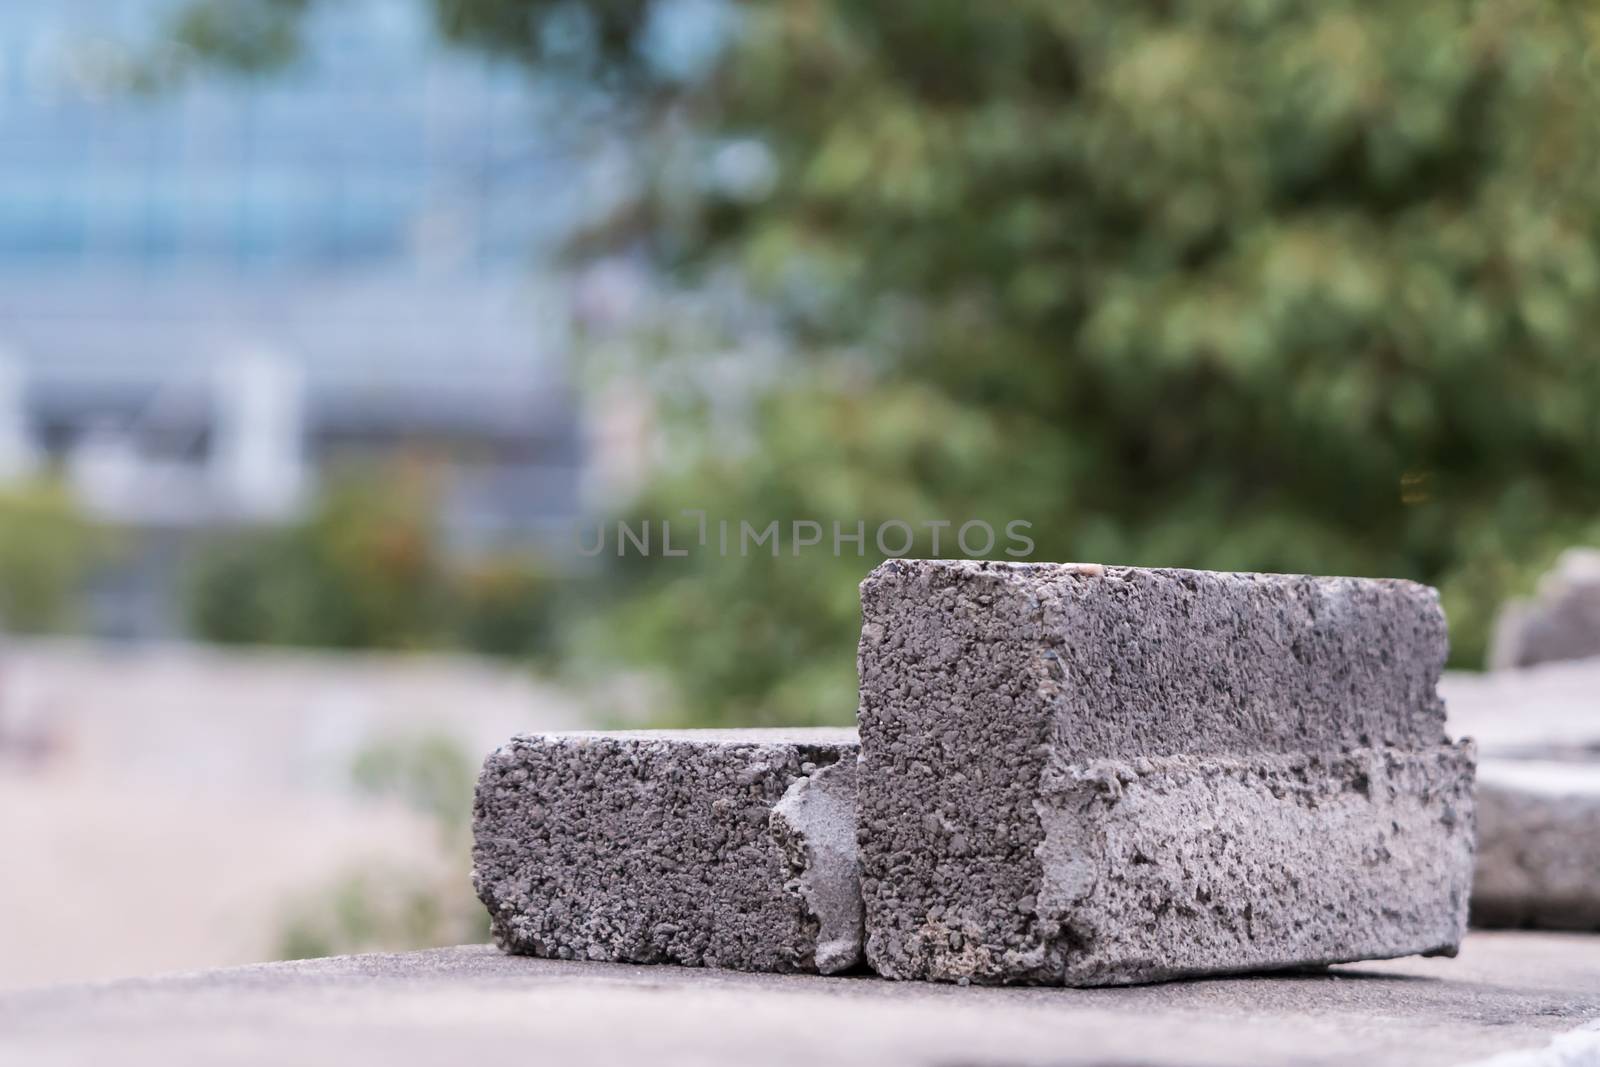 Broken brick on the wall - blurred background